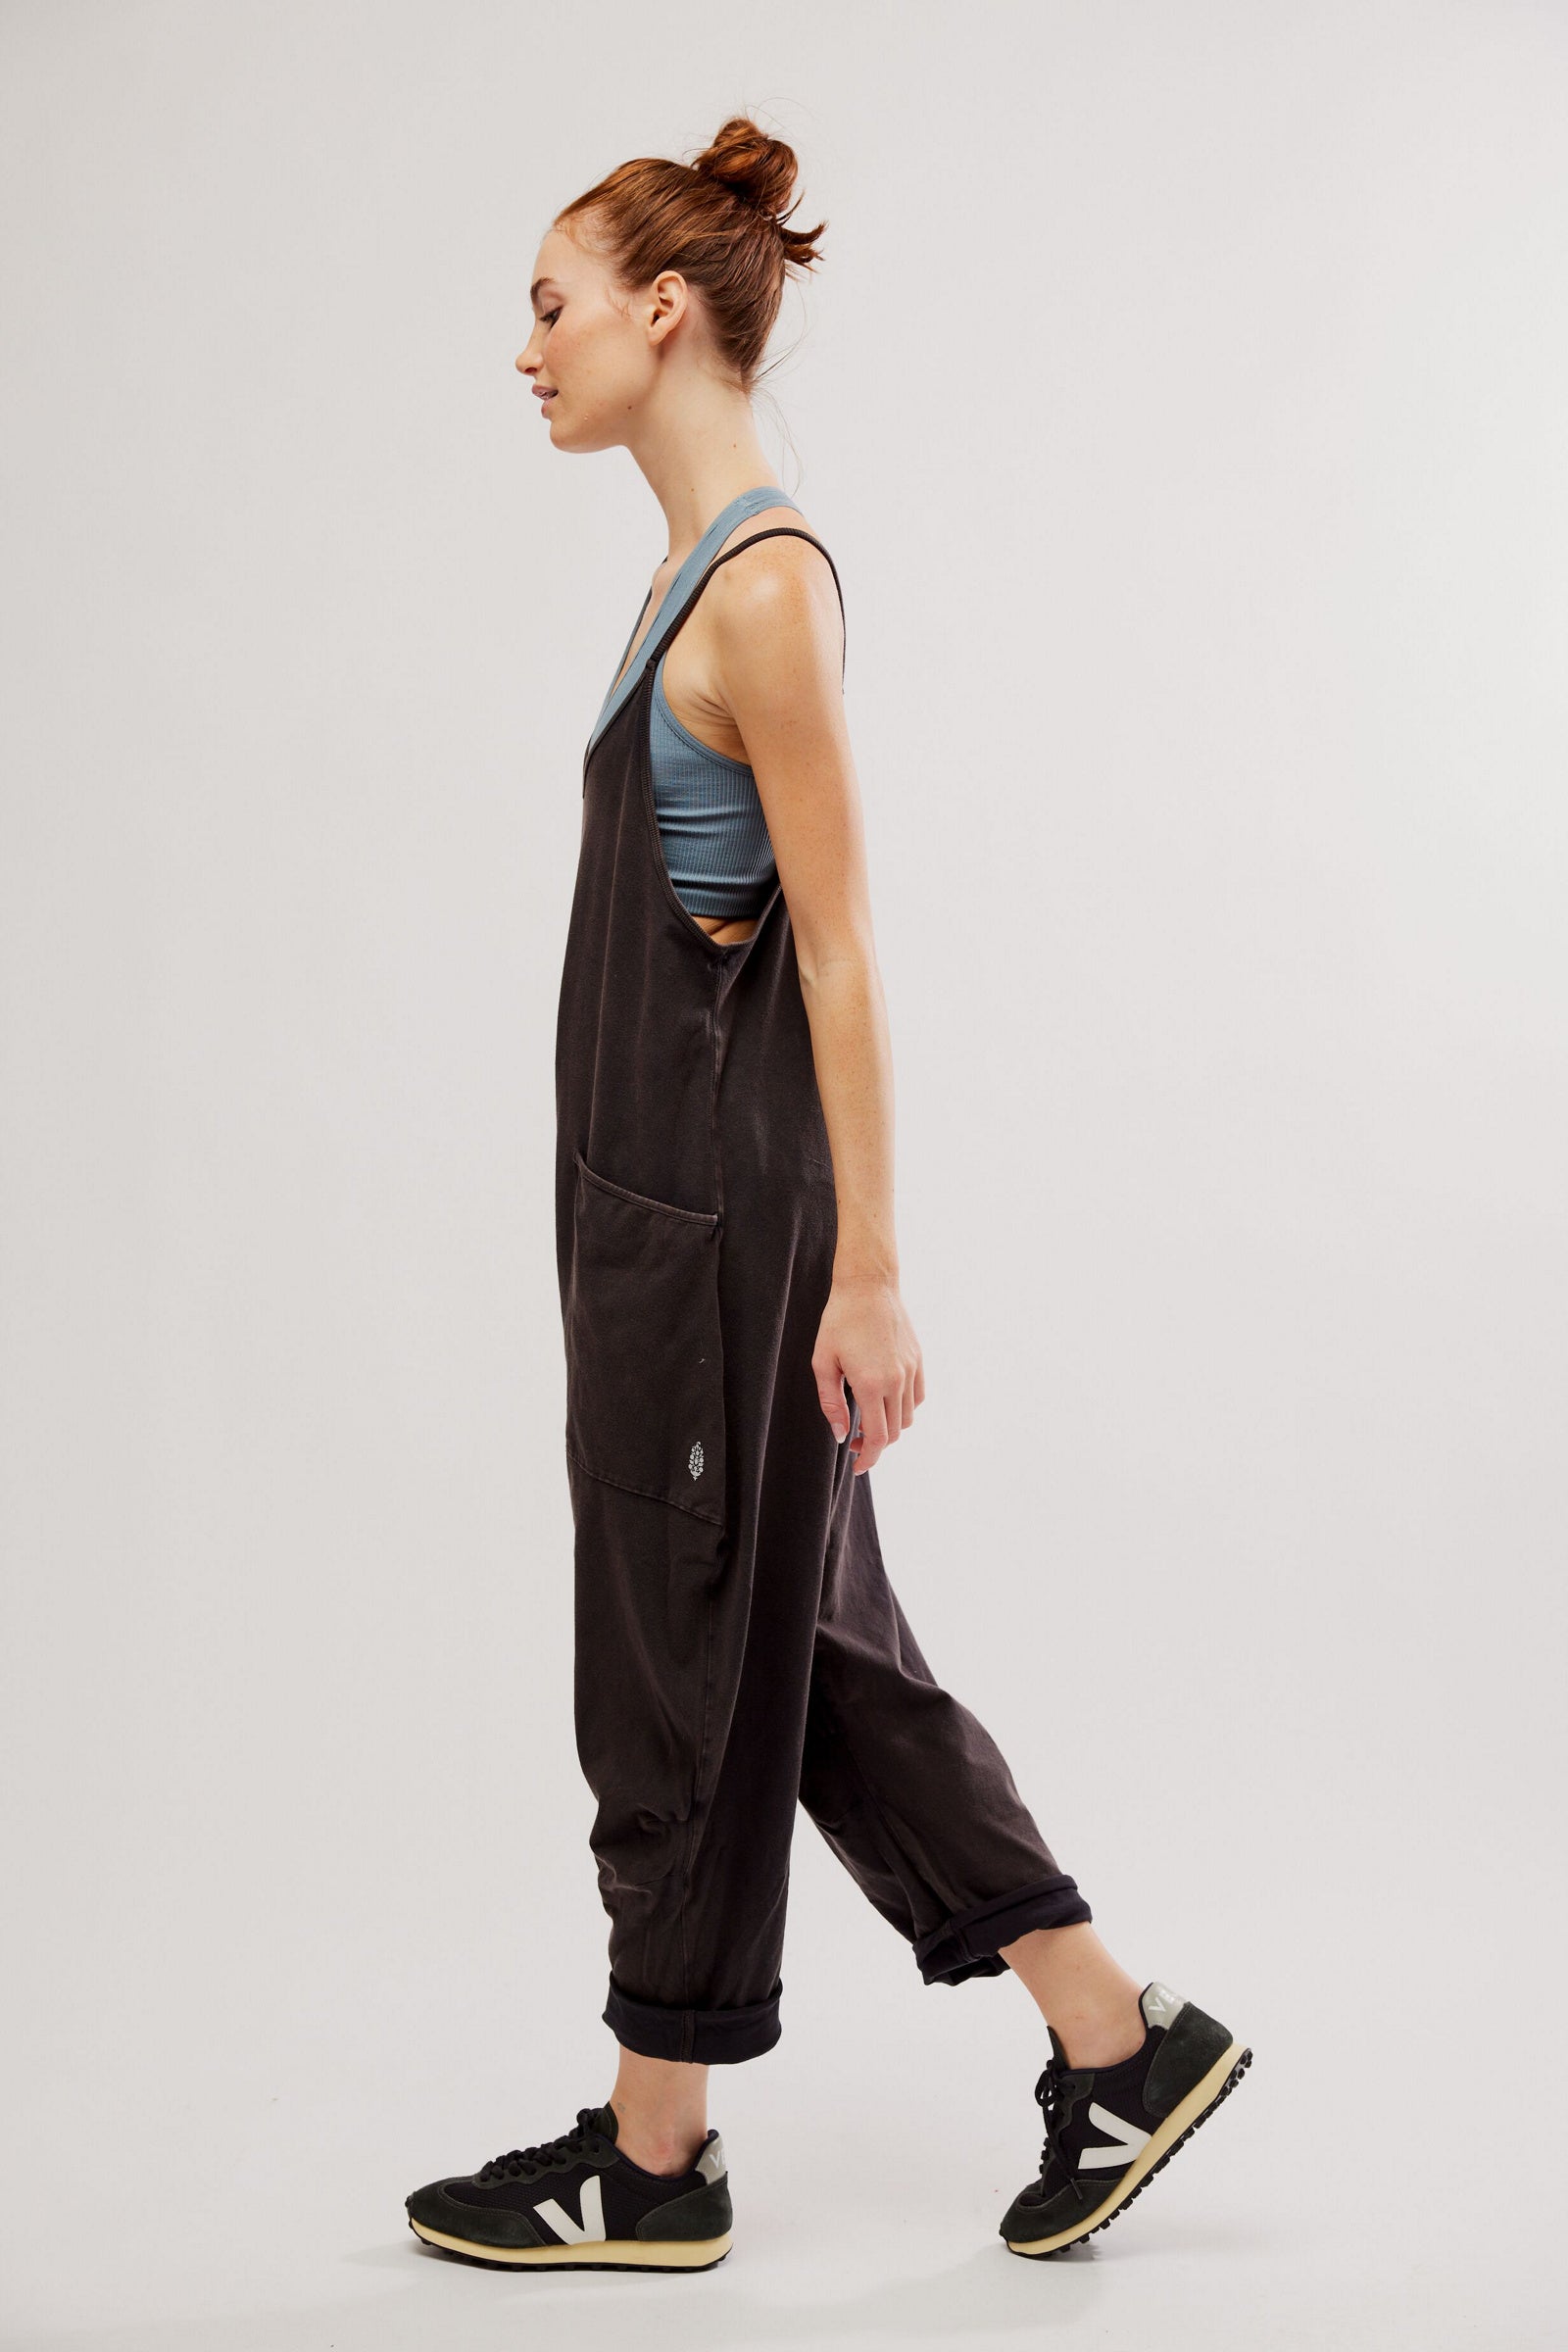 Hot Shot Onesie in Washed Black by Free People